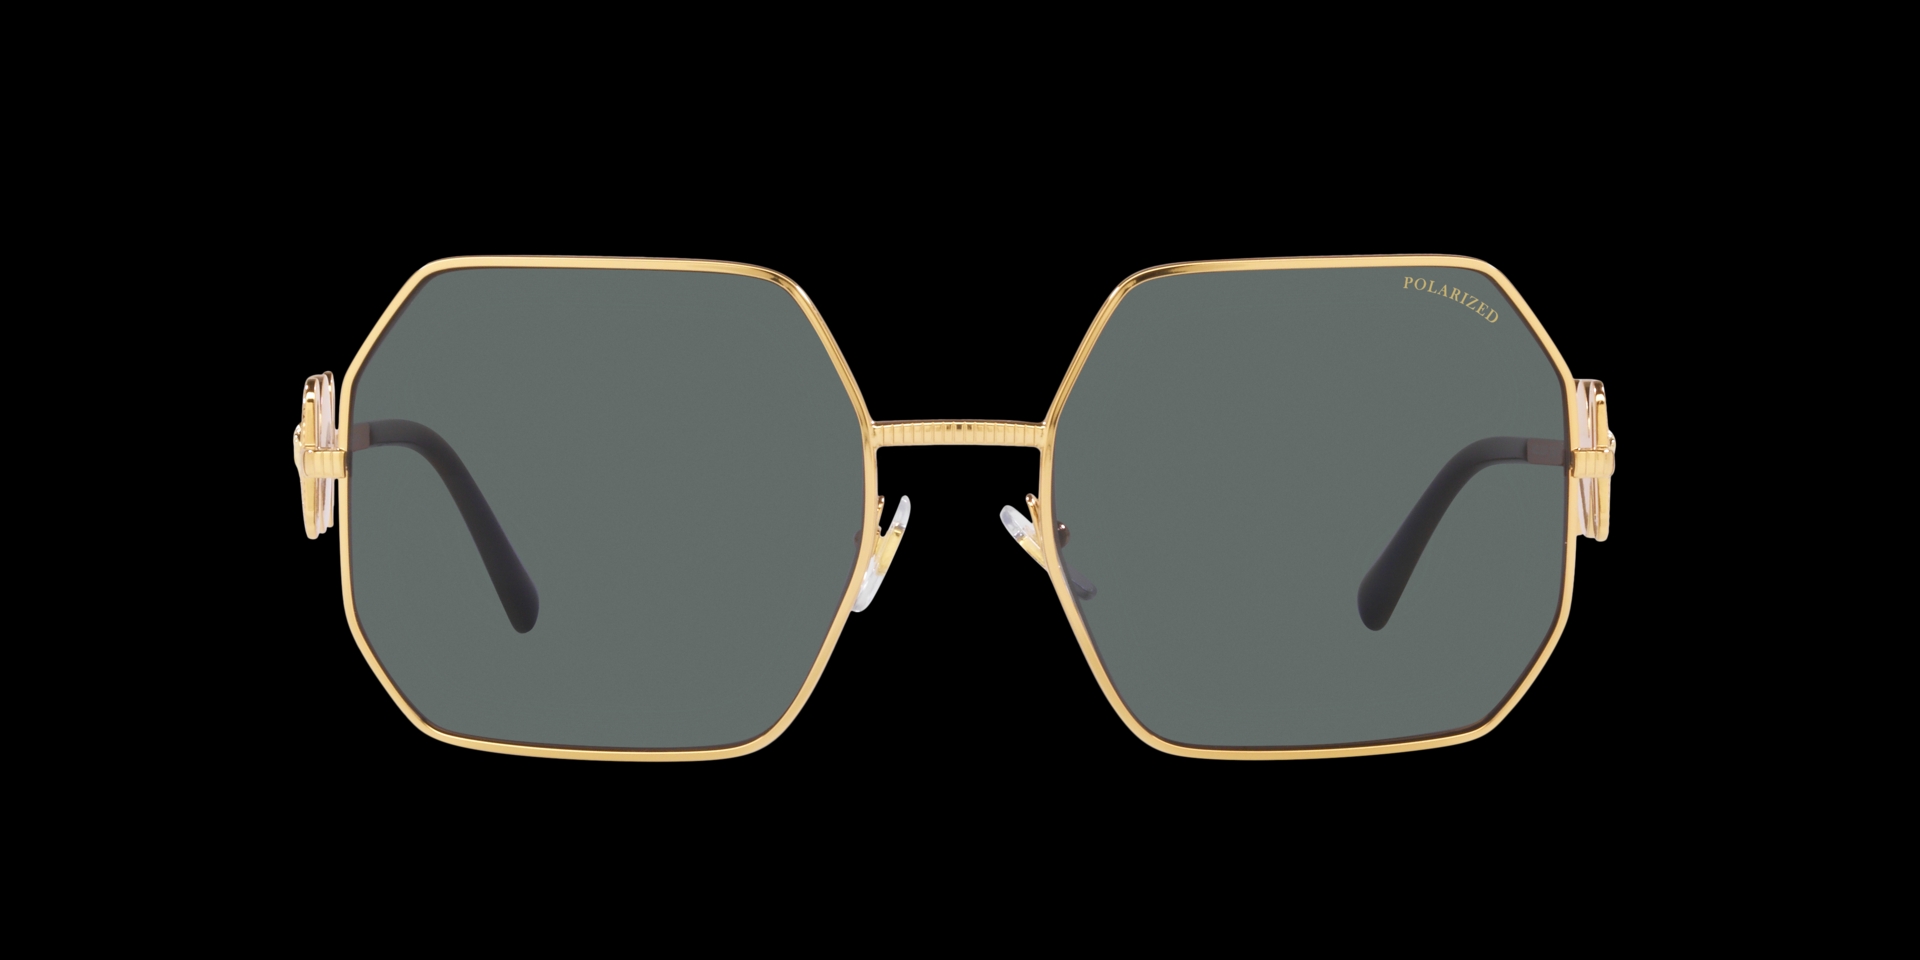 Buy Latest Versace Sunglasses Online in India at Best Price